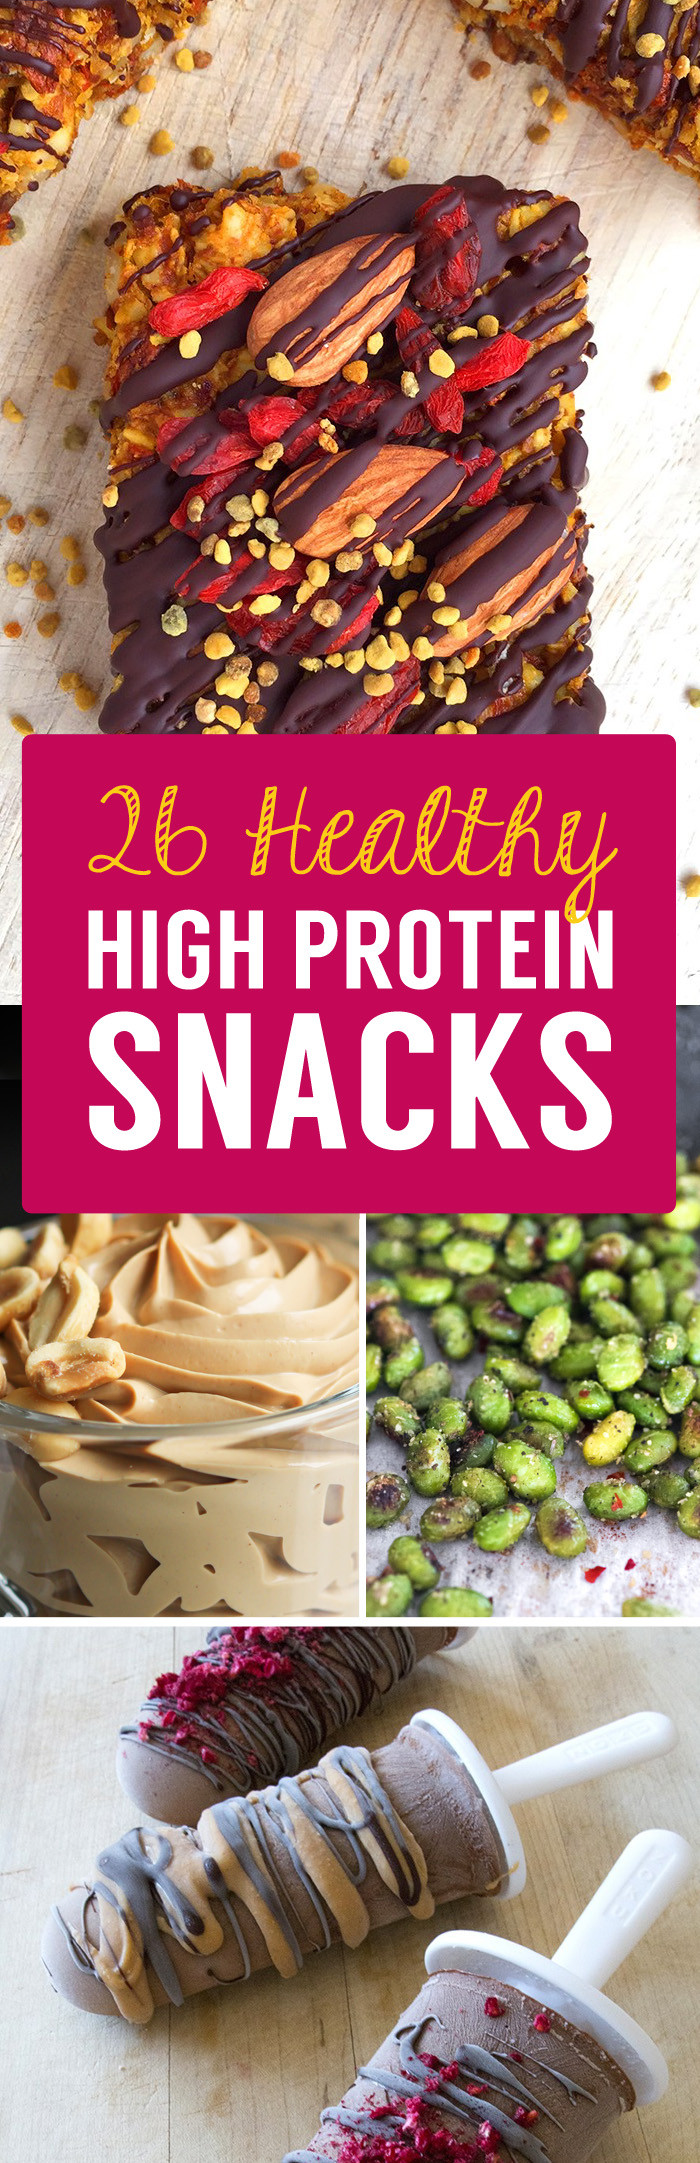 Healthy Protein Snacks
 26 High Protein Snacks That Will Help You Lose Fat & Feel